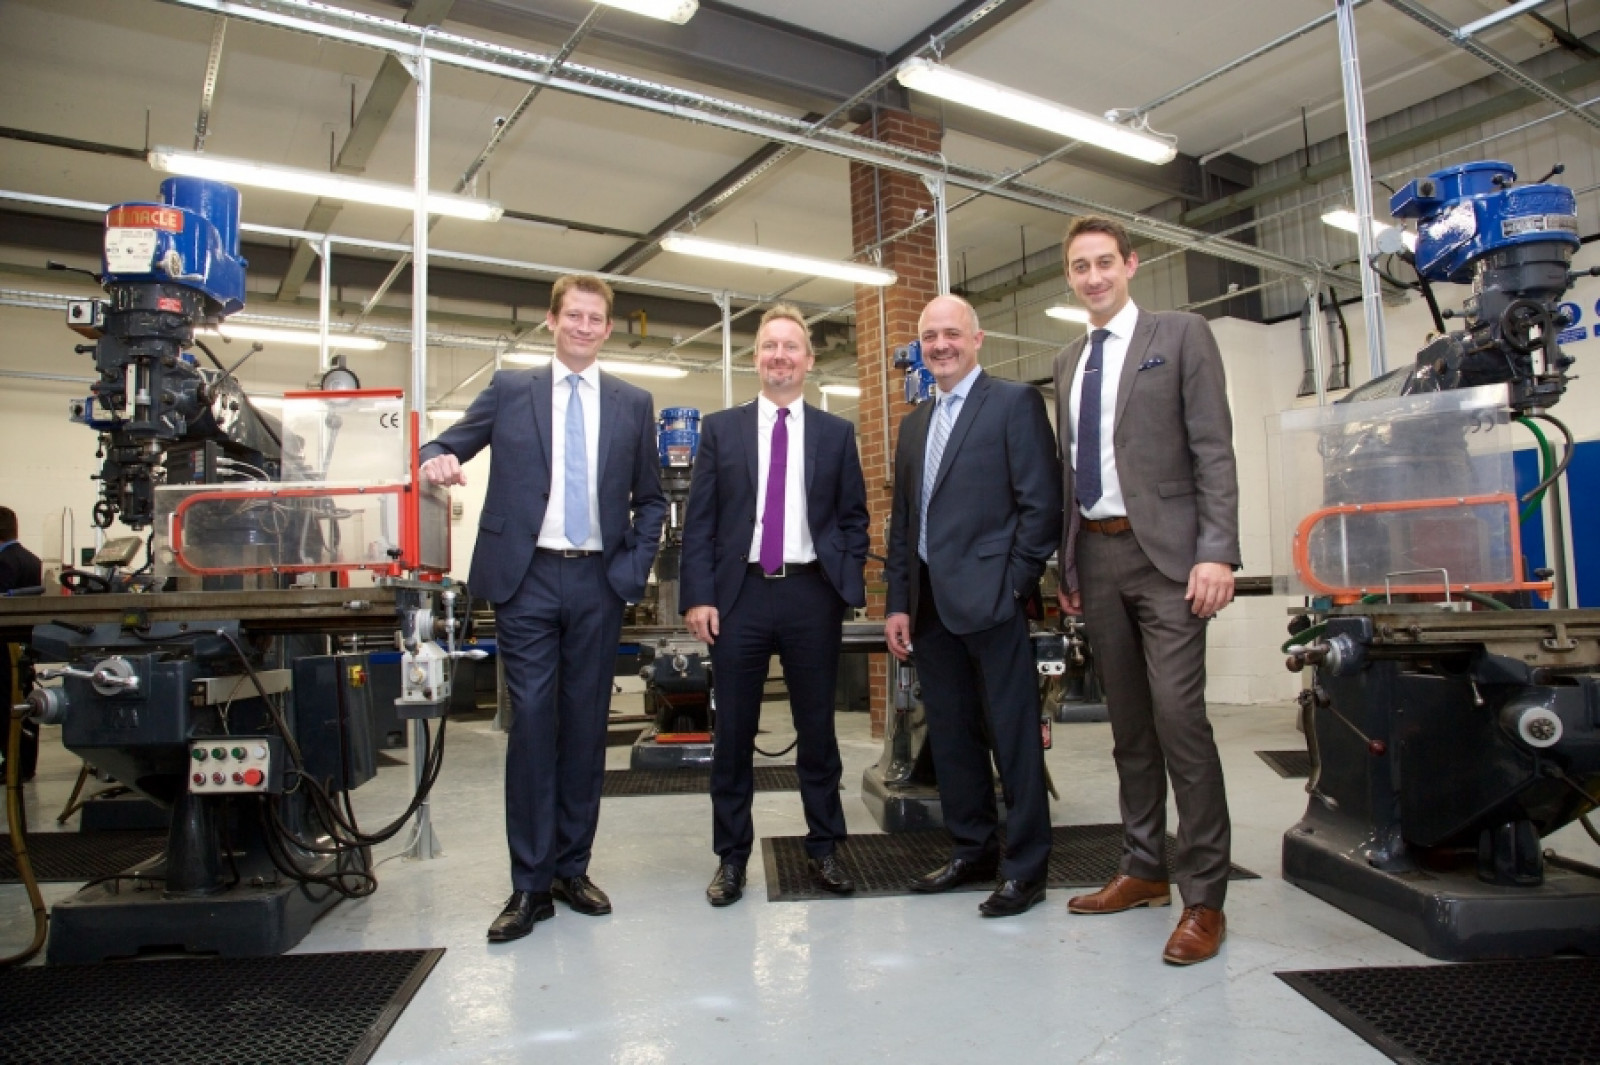 New training academy opens with promise of boosting Shropshires manufacturing skills